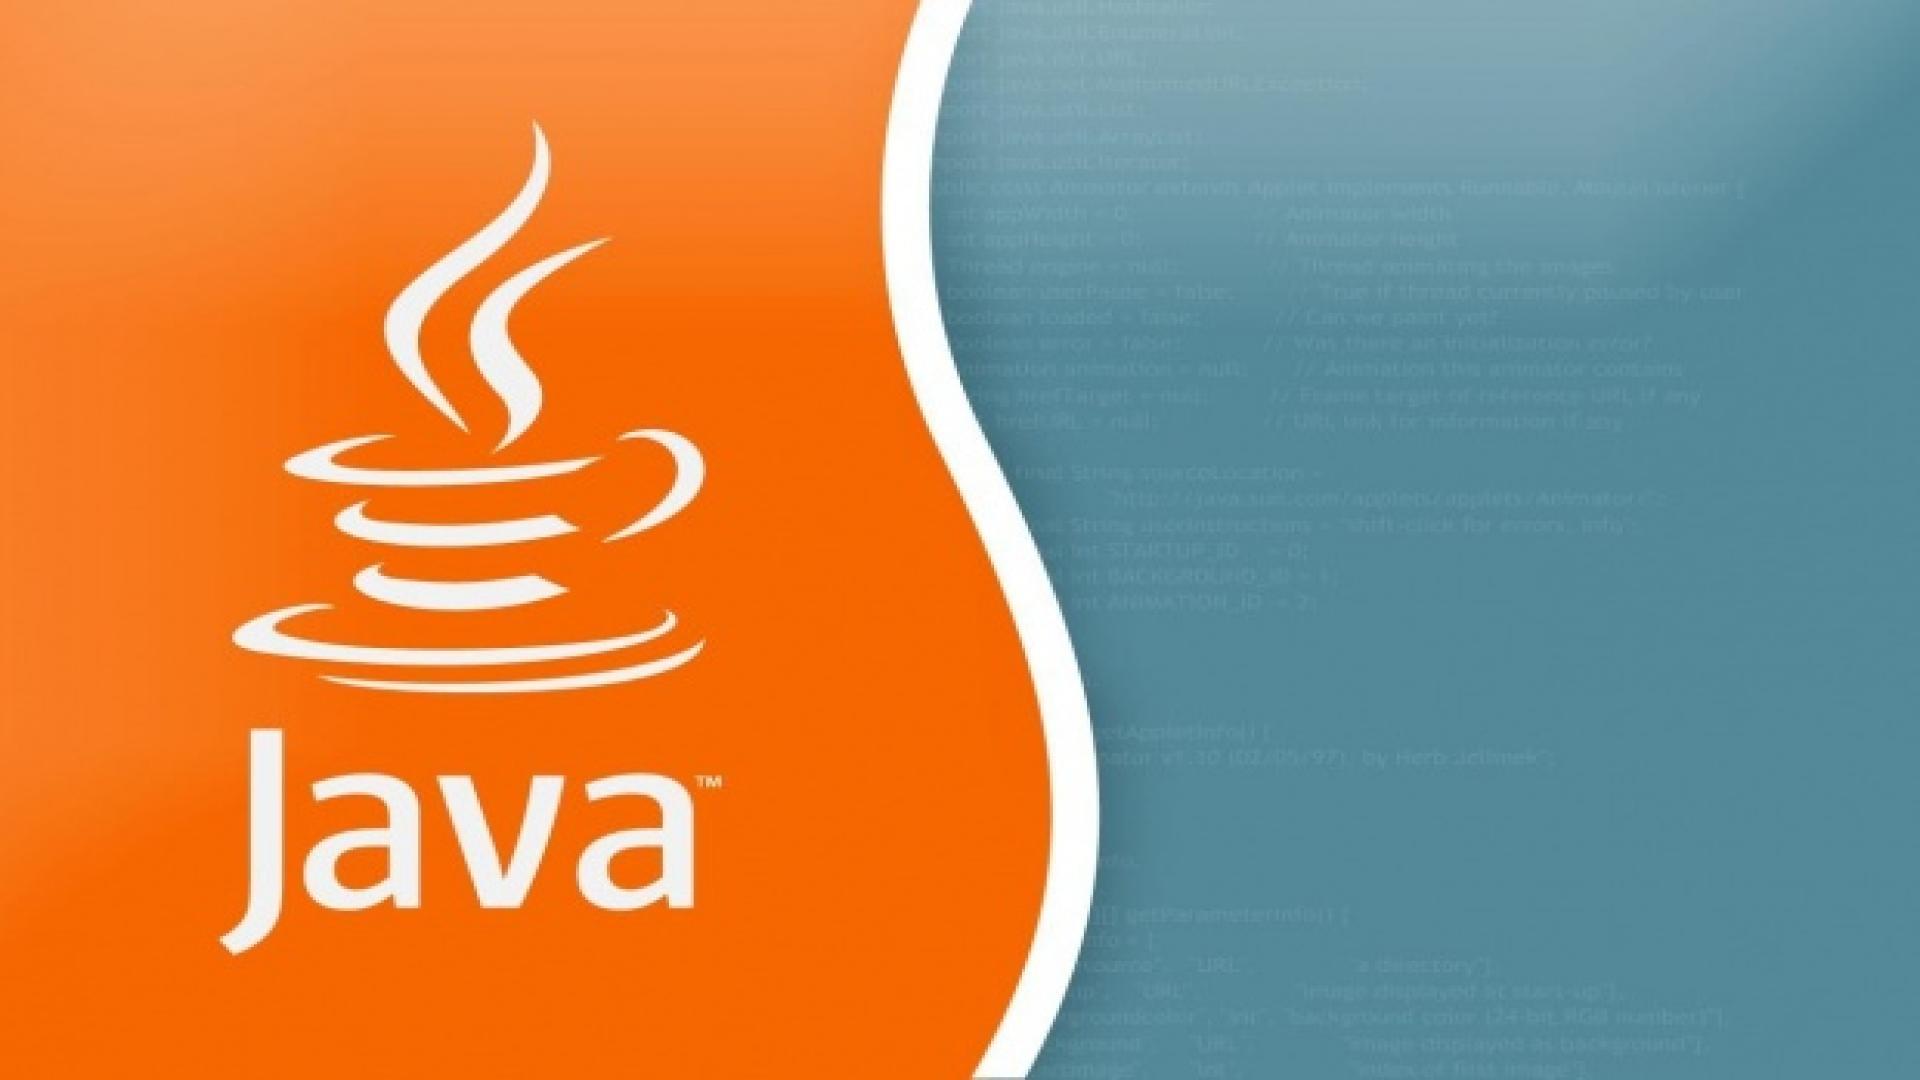 Java Wallpapers 0.04 Mb